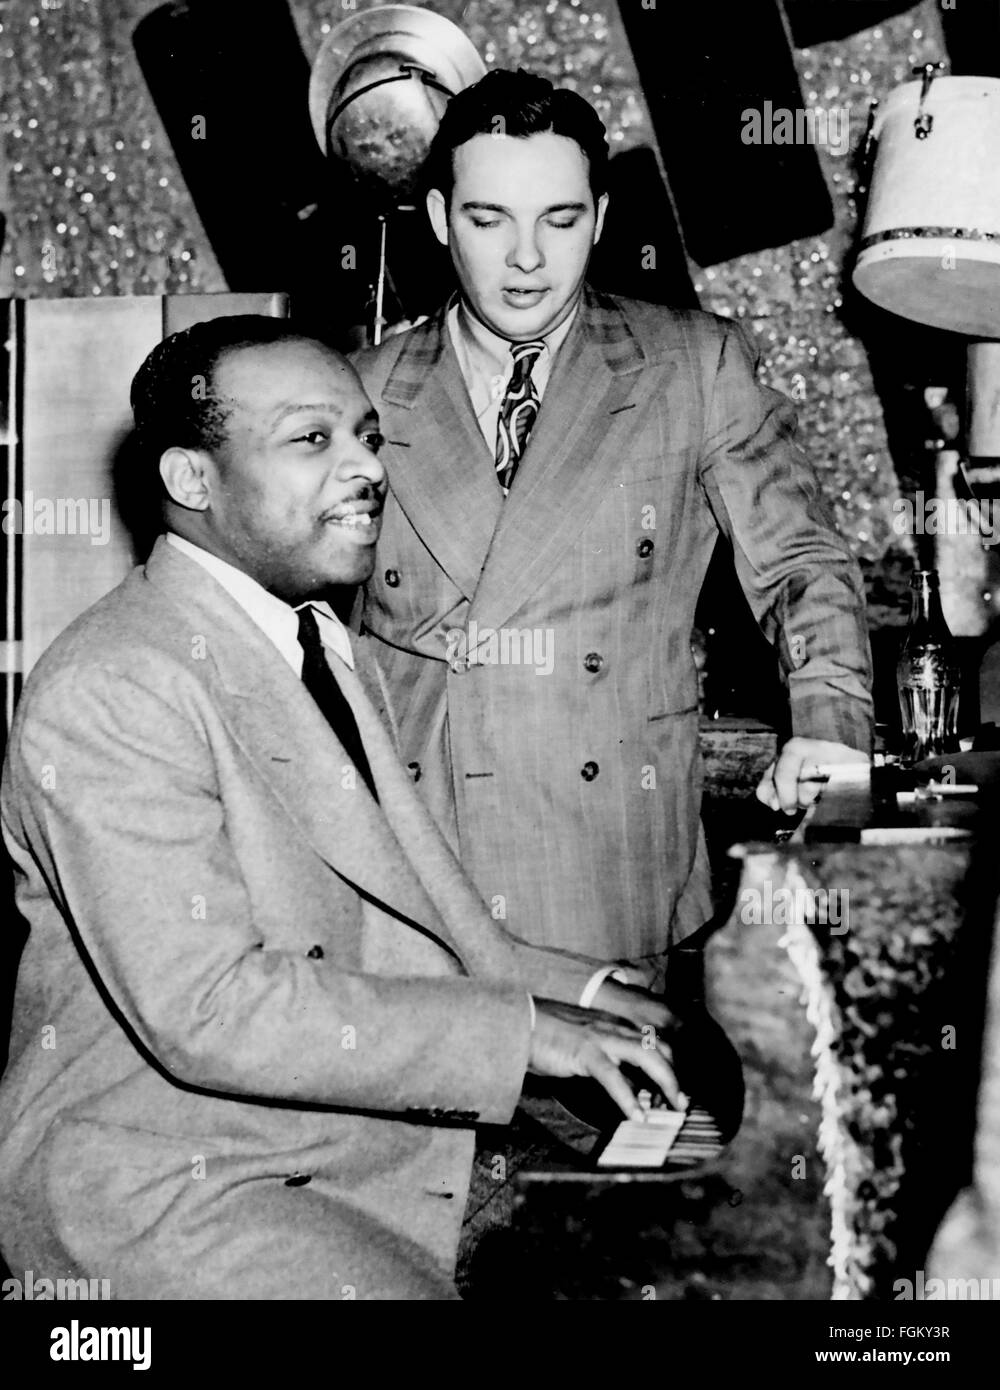 COUNT BASIE US jazz musician at piano with bandleader Bob Crosby at the Howard Theater, Washington, D.C., about 1941. Photo US Library of Congress Stock Photo